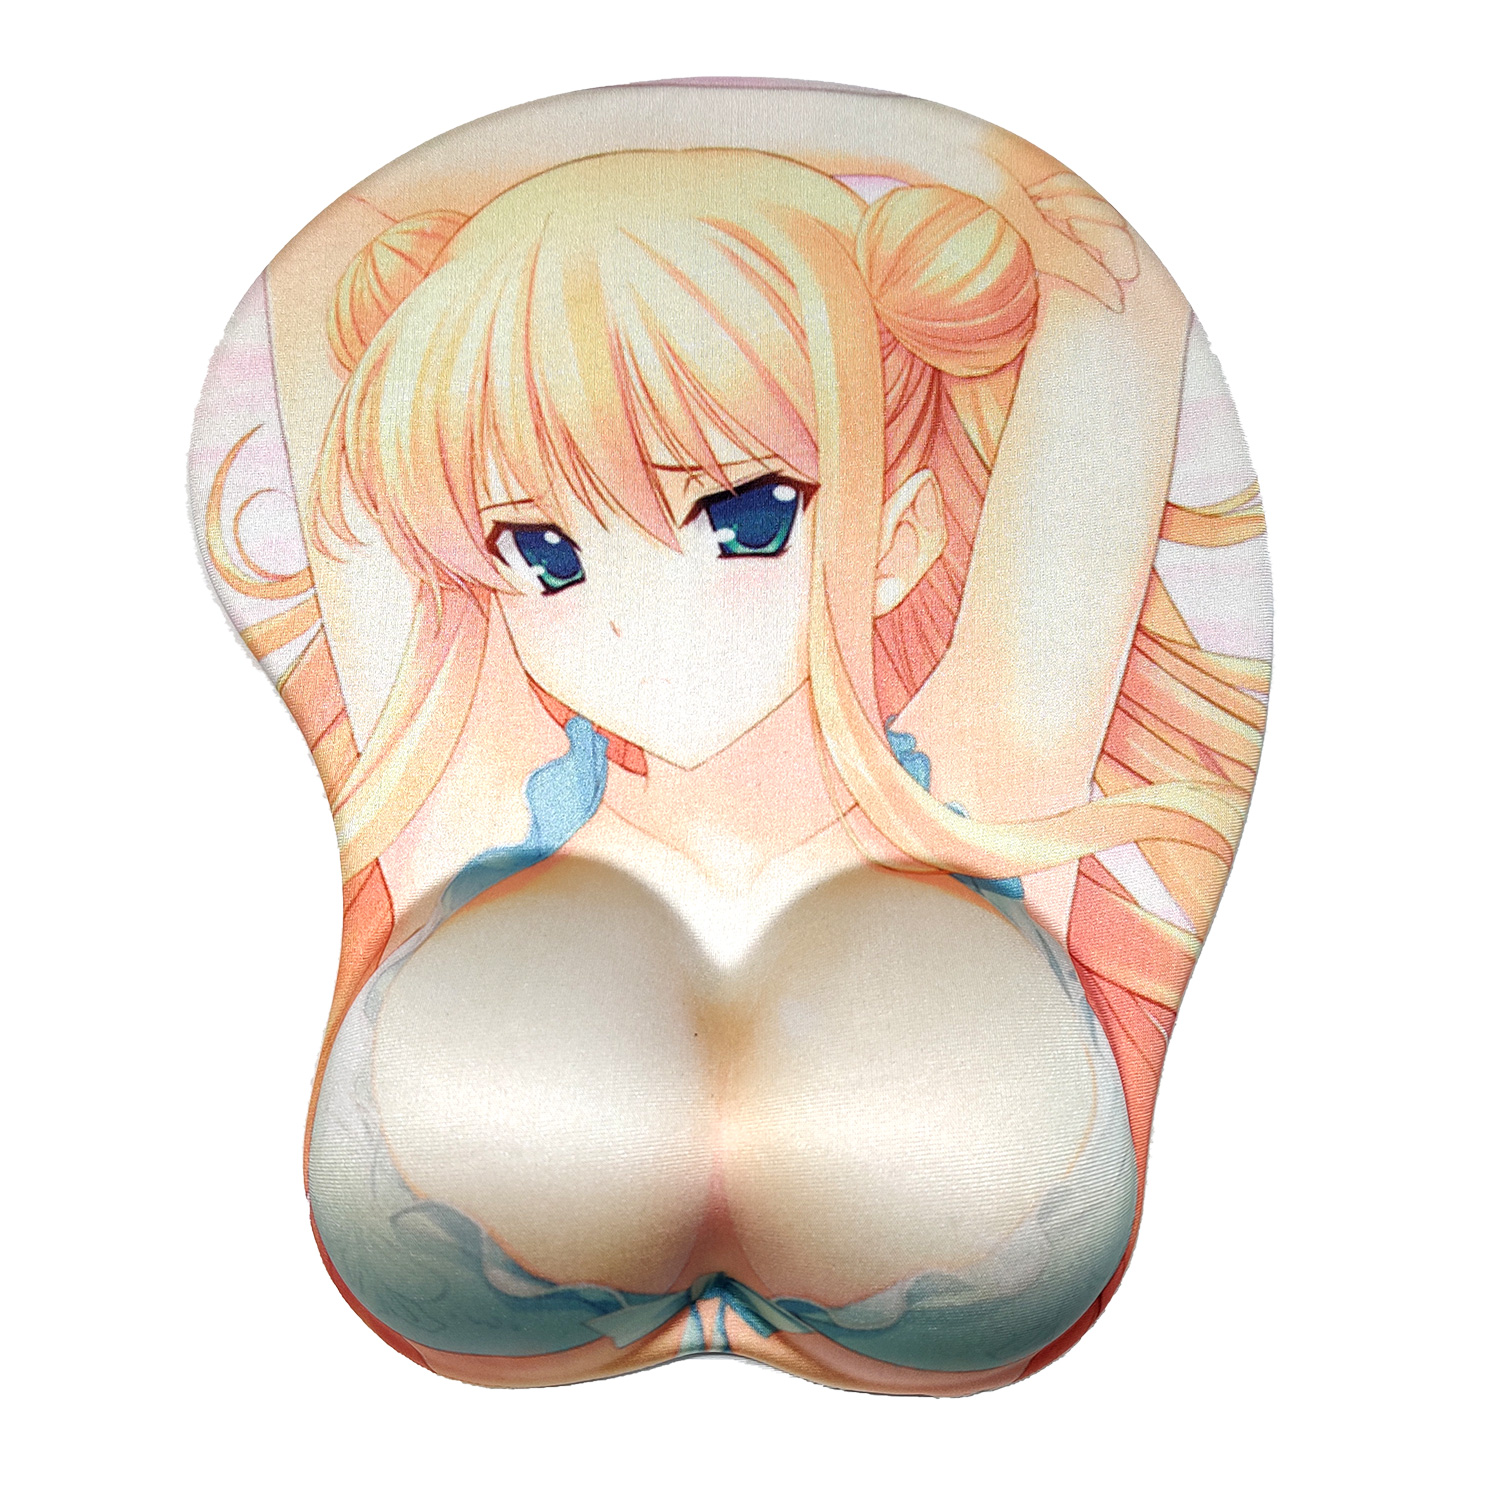 bia javed recommends Anime Titty Mouse Pad